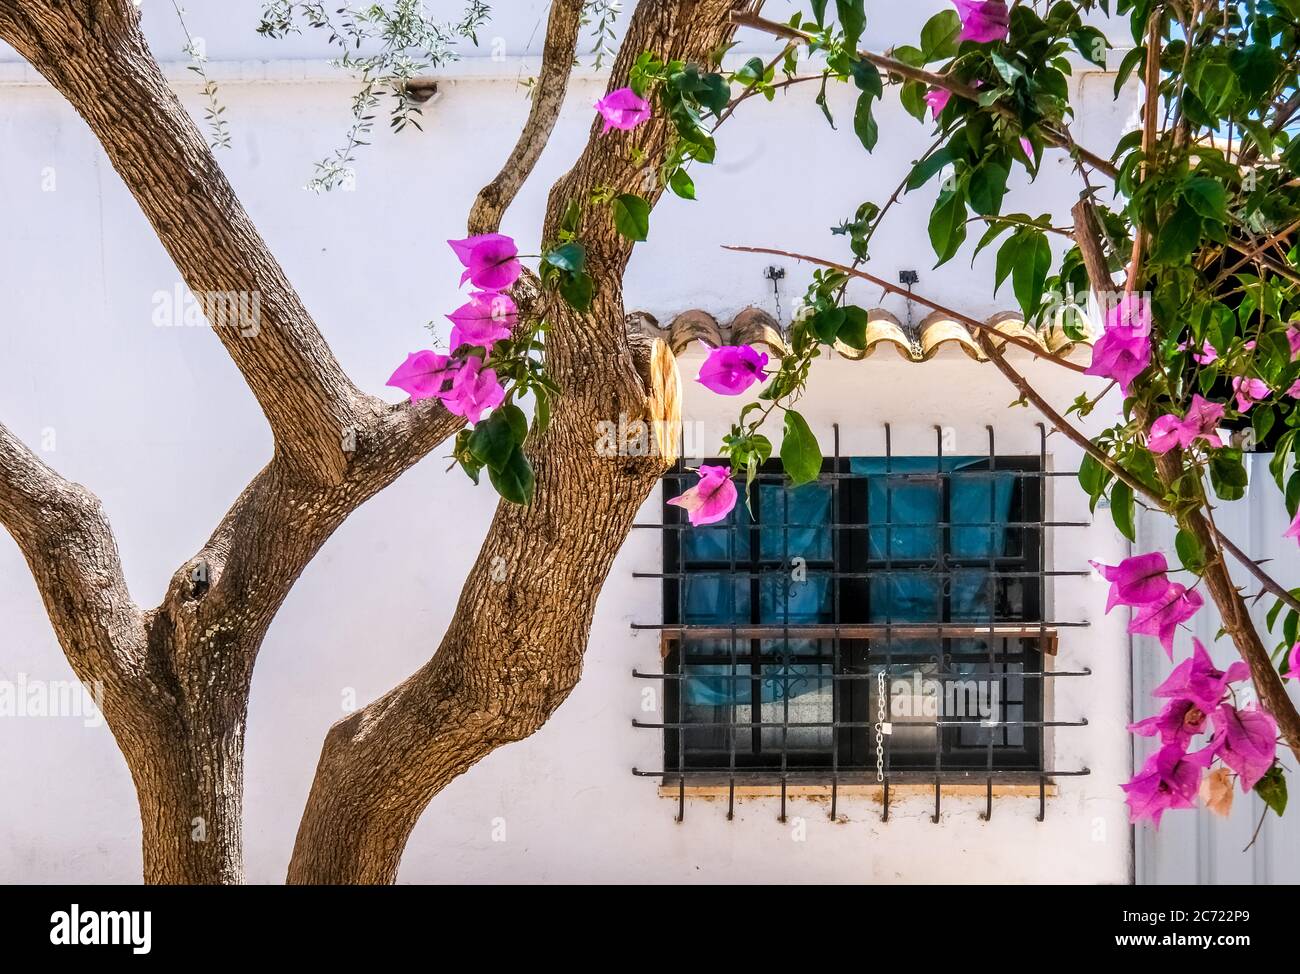 Olive tree and flowering bougavilla in a backyard in the tourist resort Cala d'Or on the south-east coast of Mallorca. barred window, Santanyí, Europe Stock Photo